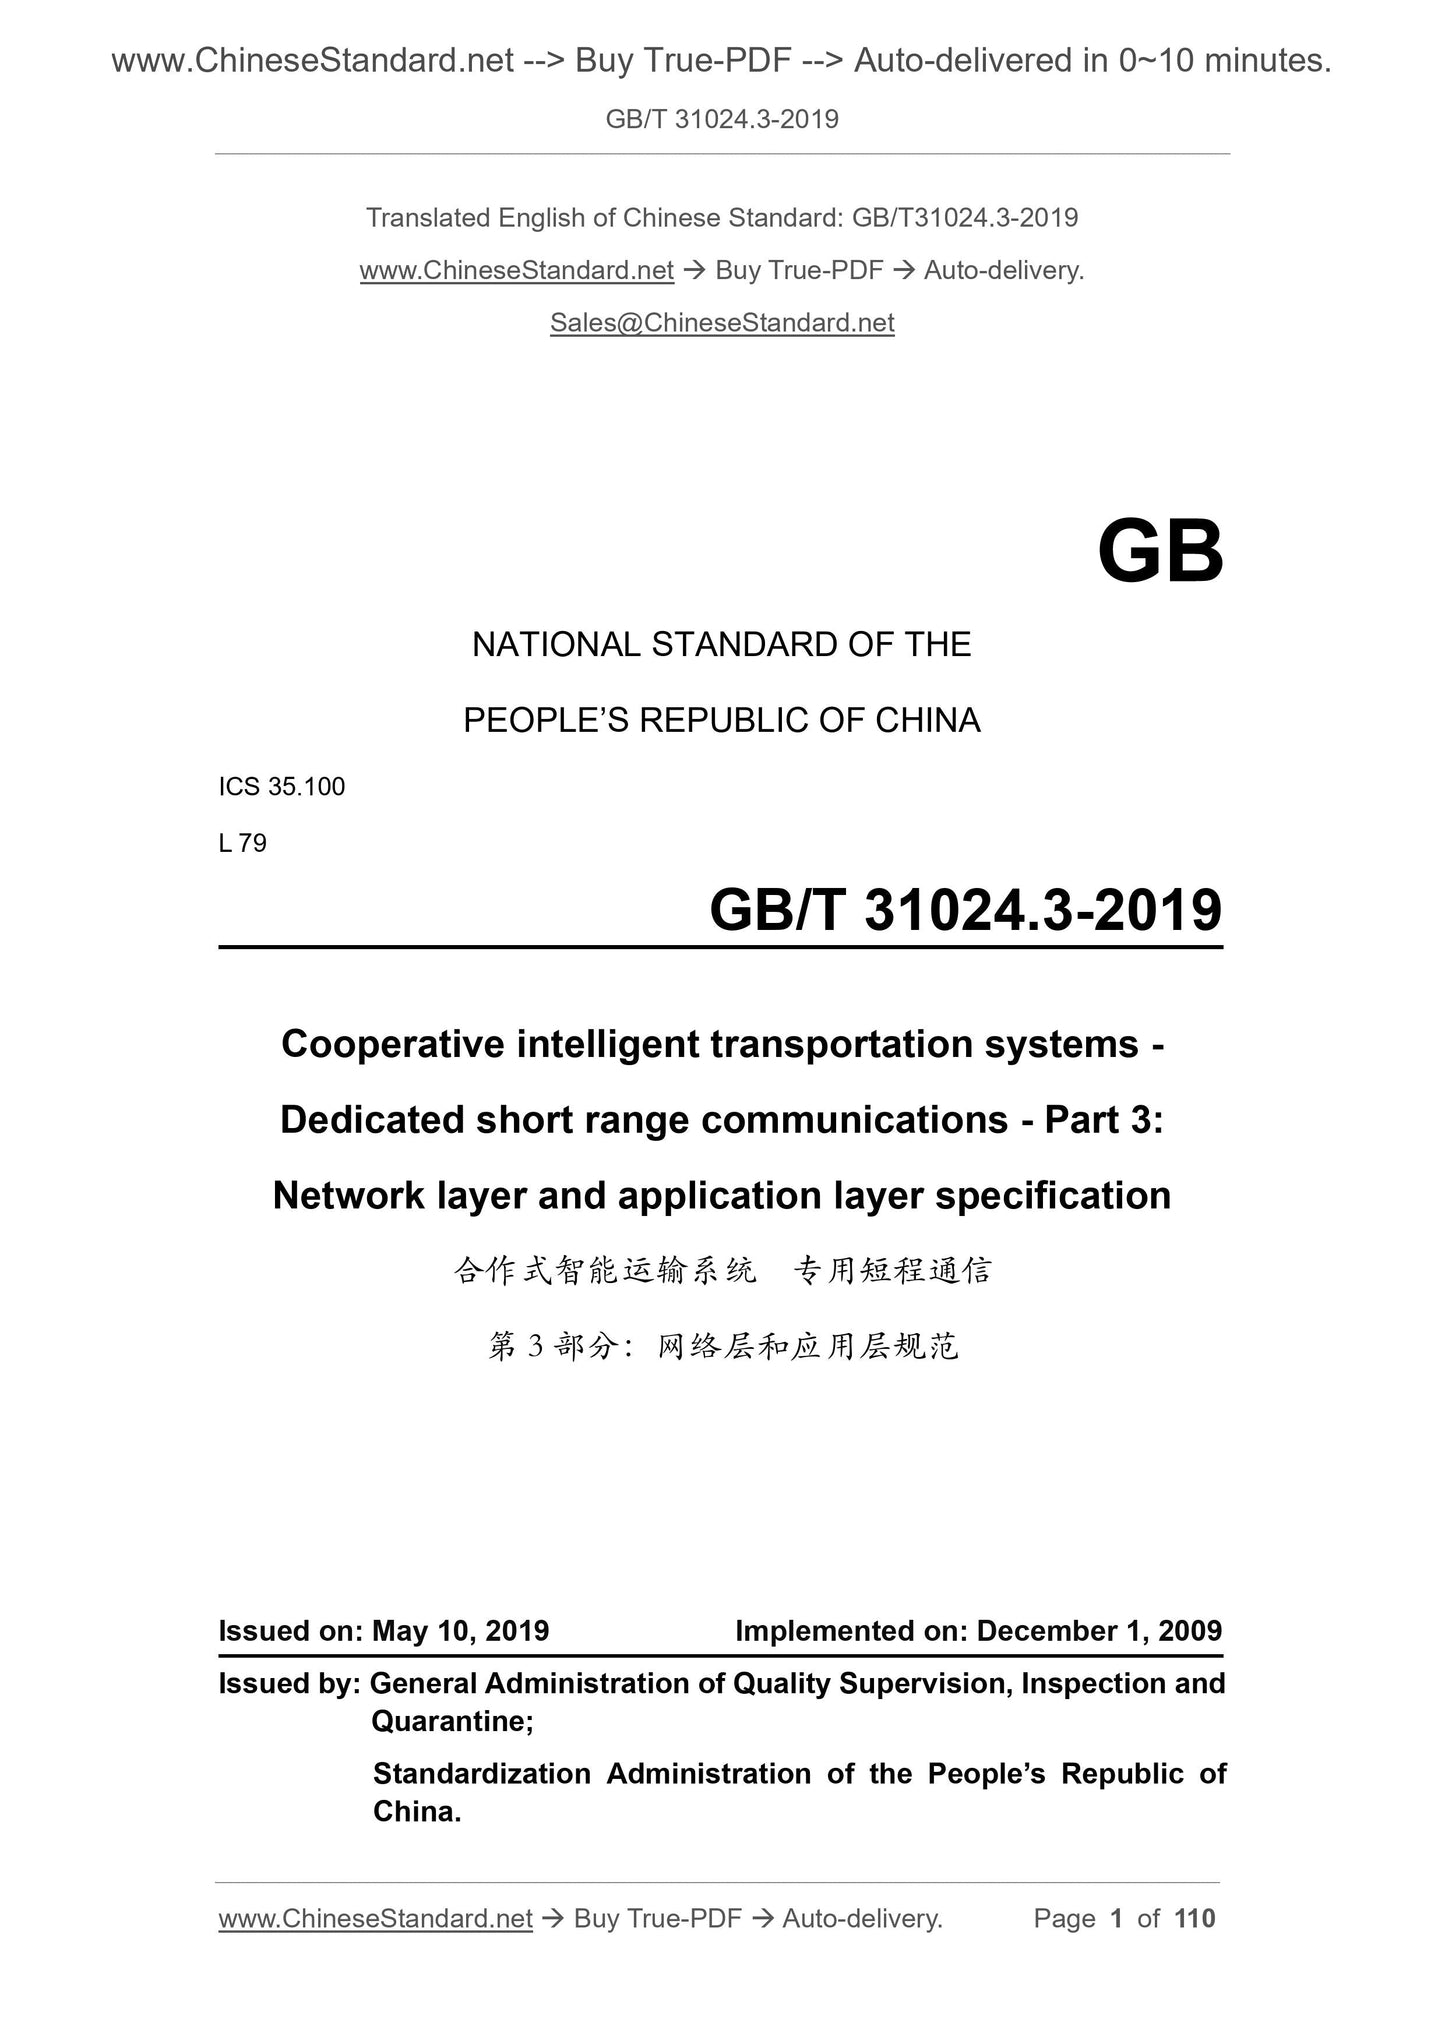 GB/T 31024.3-2019 Page 1